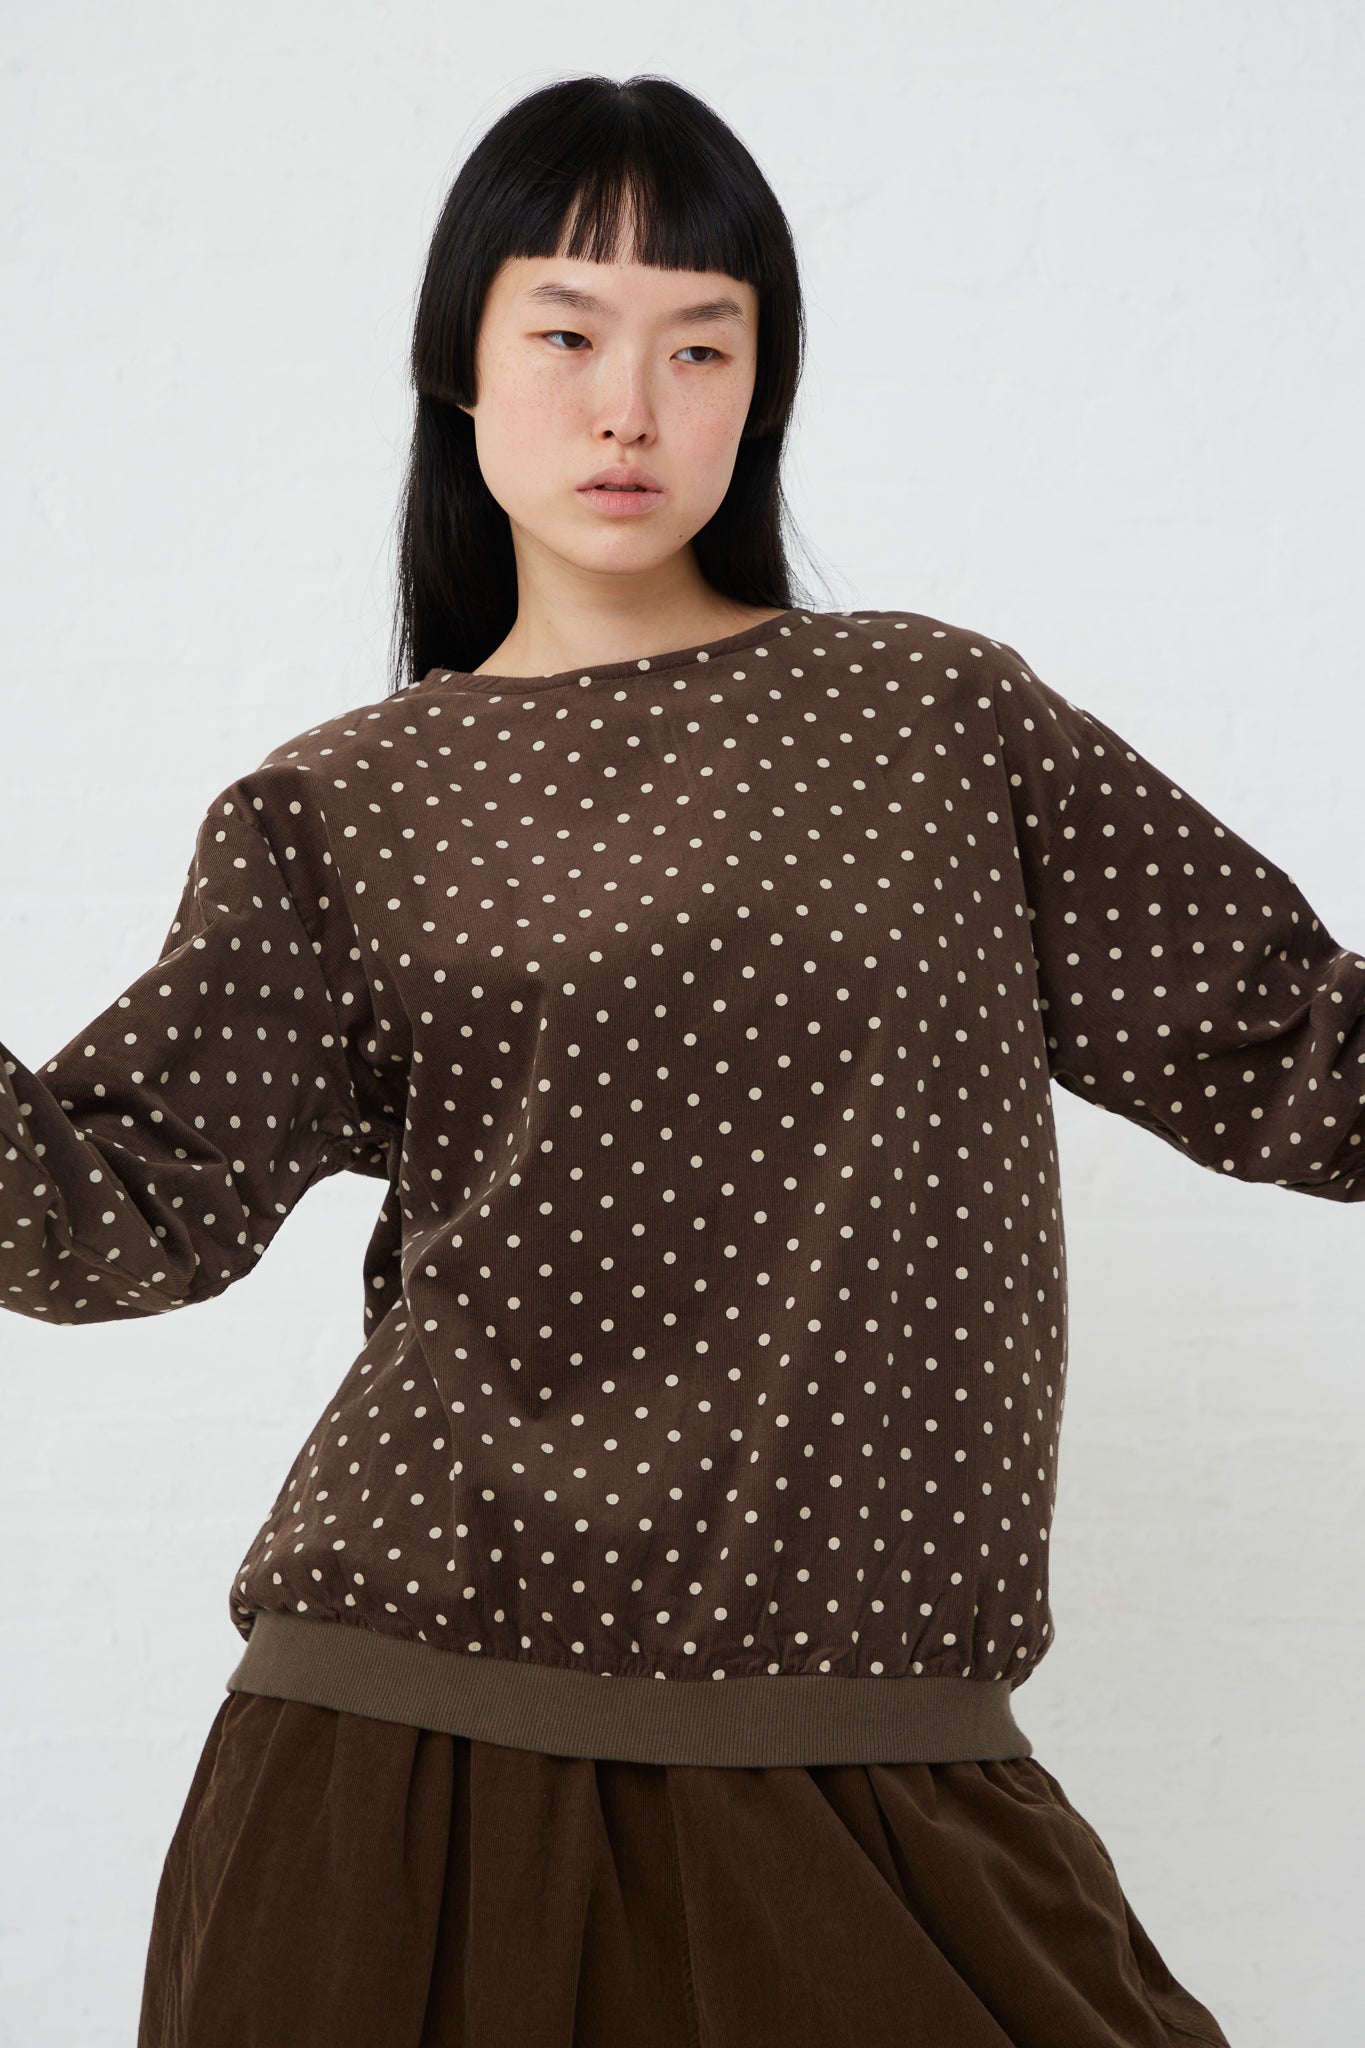 The model is wearing an Ichi Cotton Polka Dot Pullover in Brown.